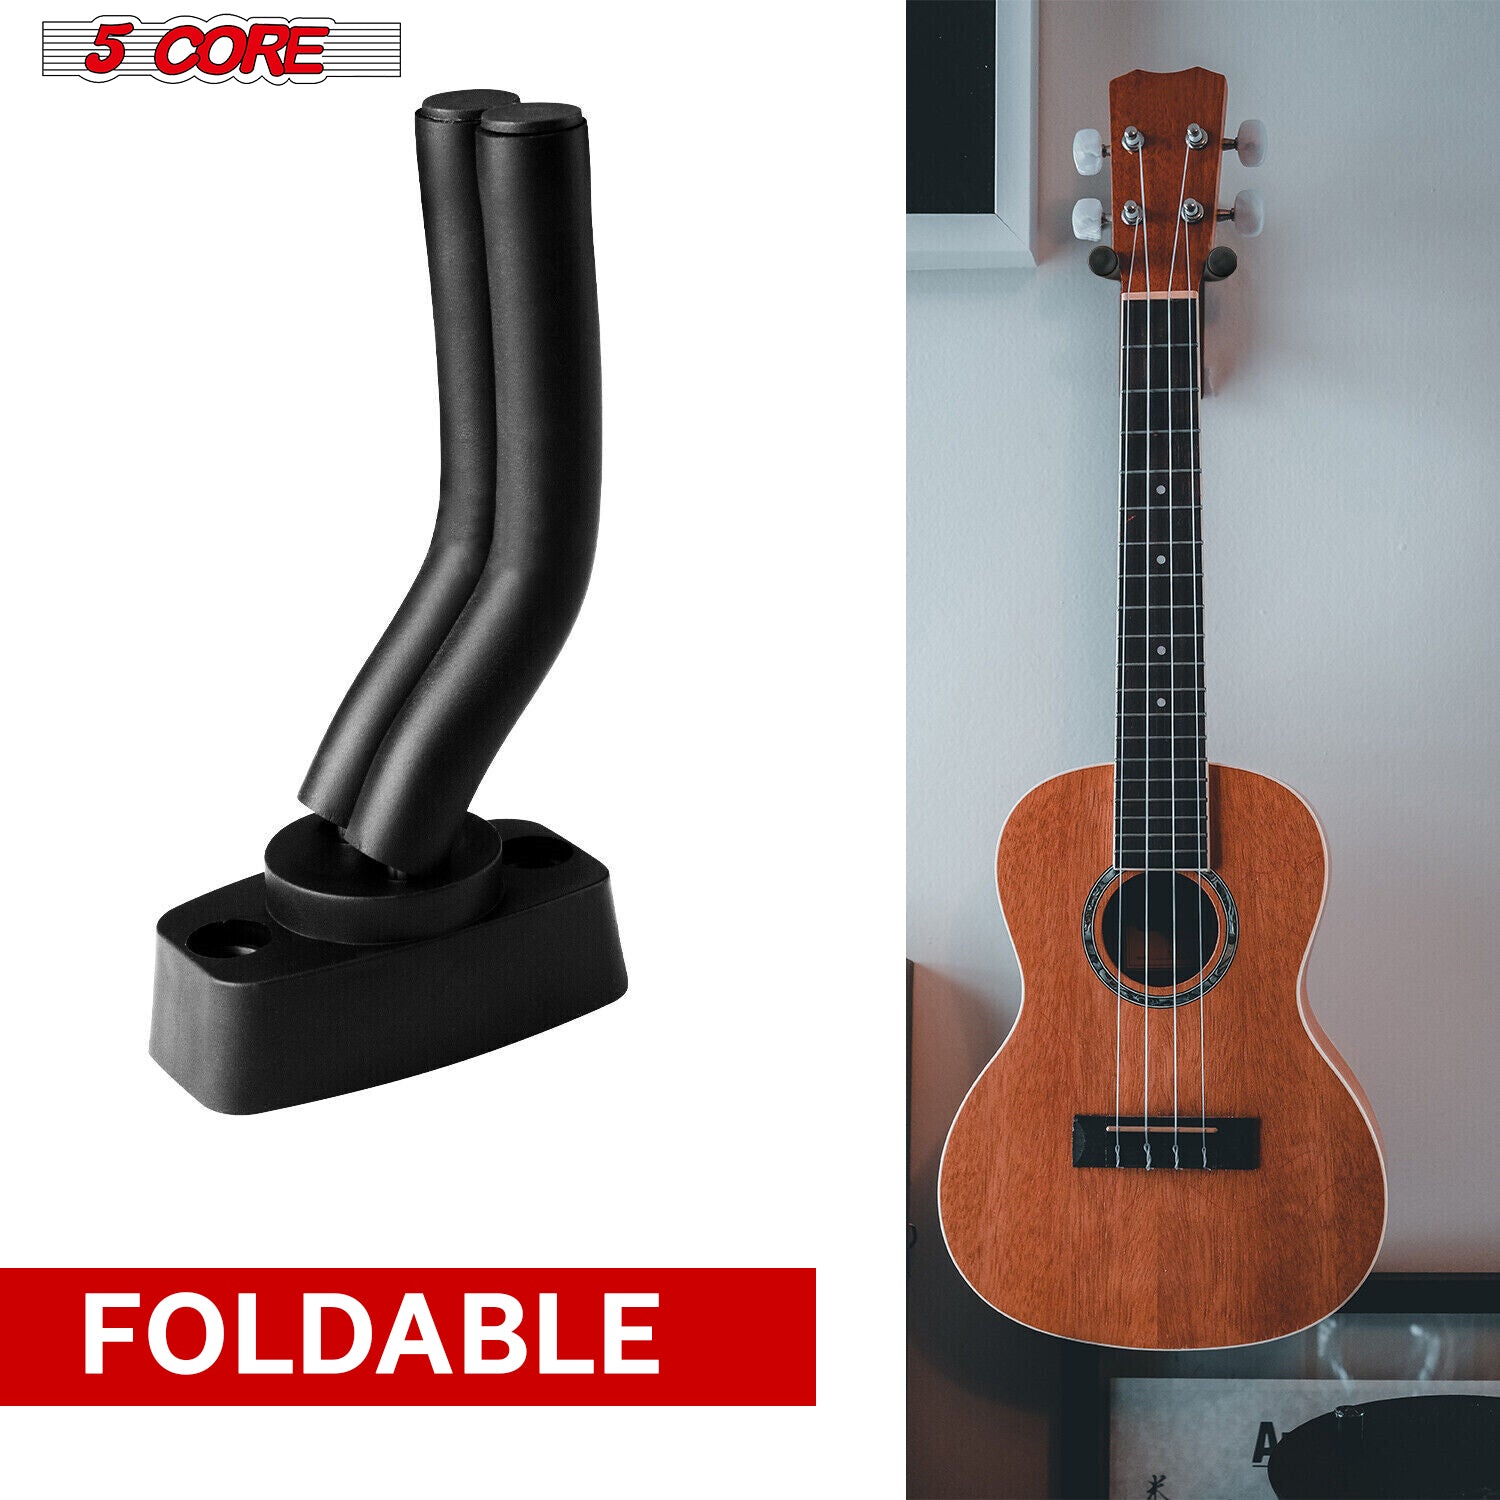 Secure Your Guitar with Durable Wall Holder